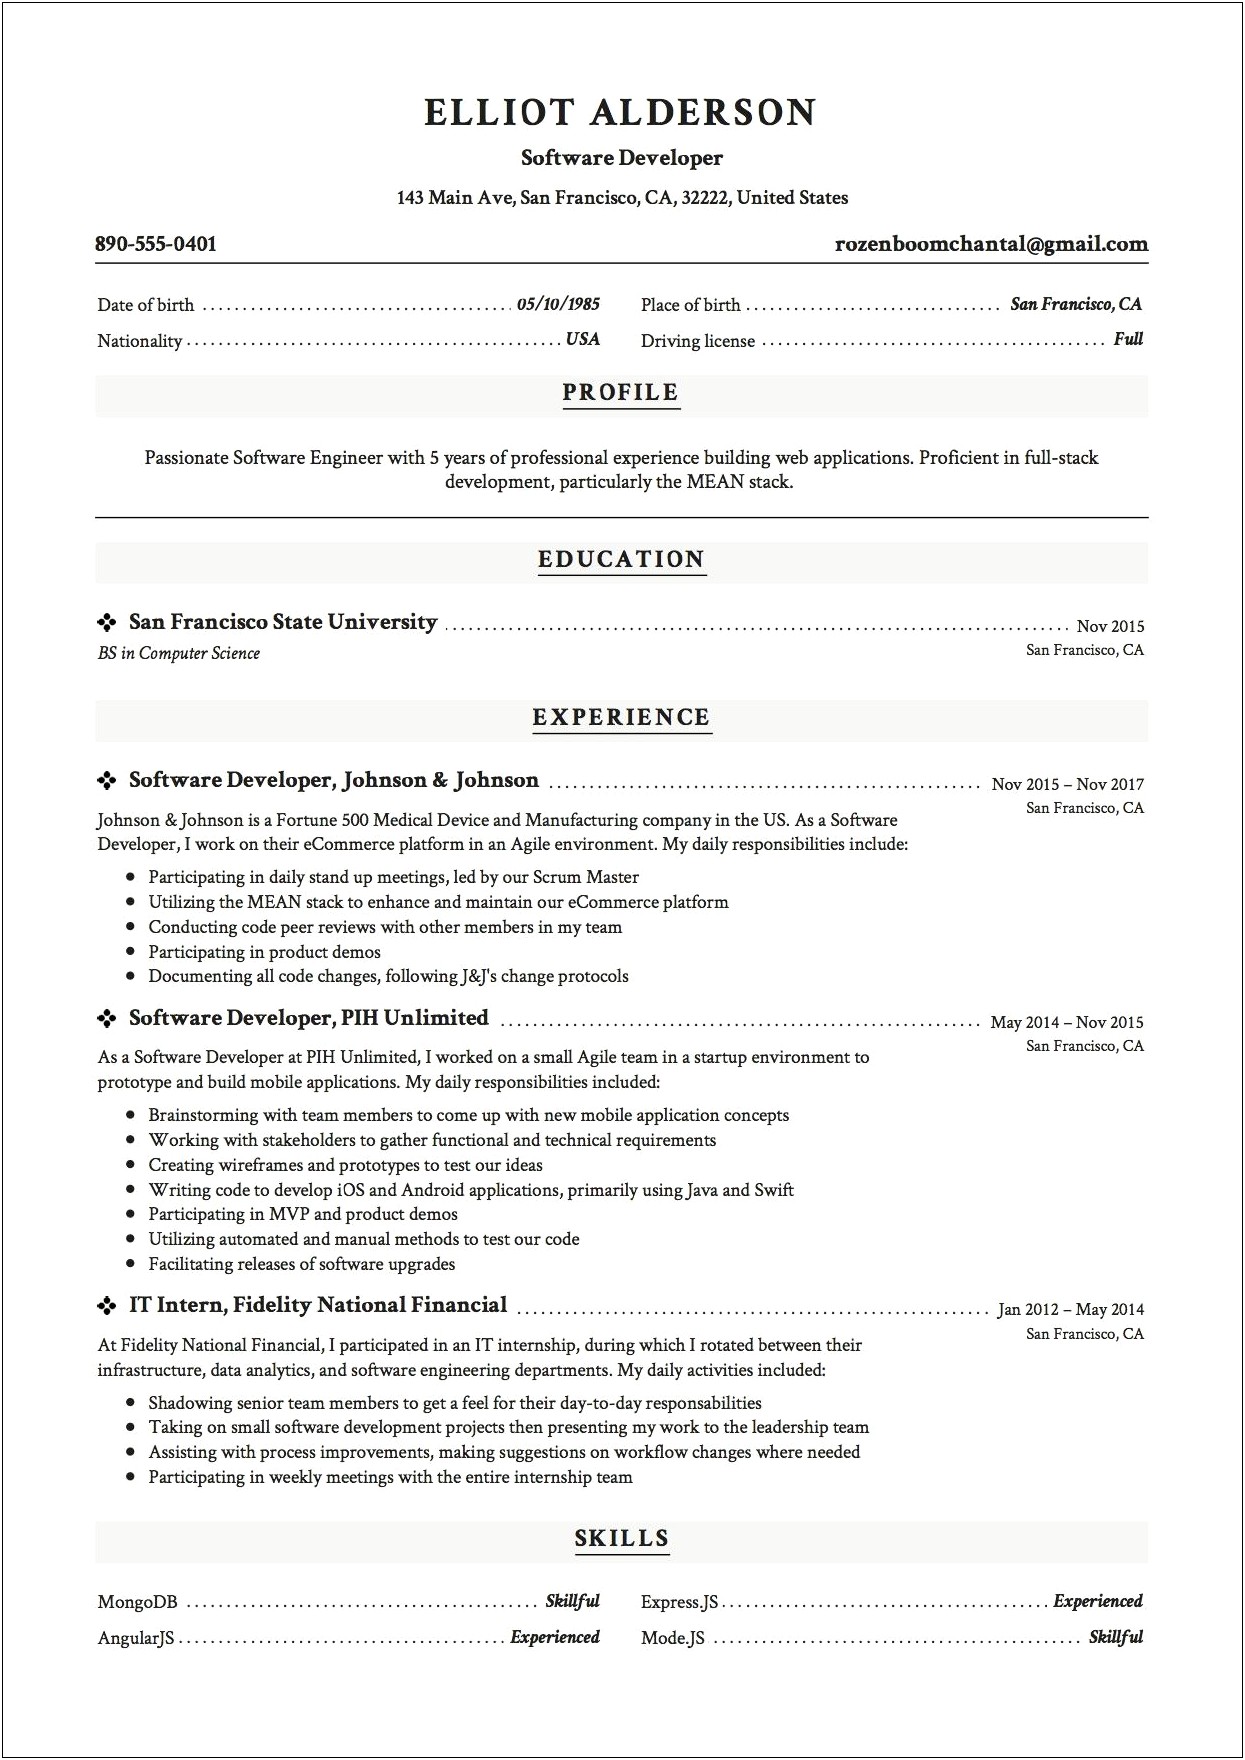 Example Resume For Information Technology